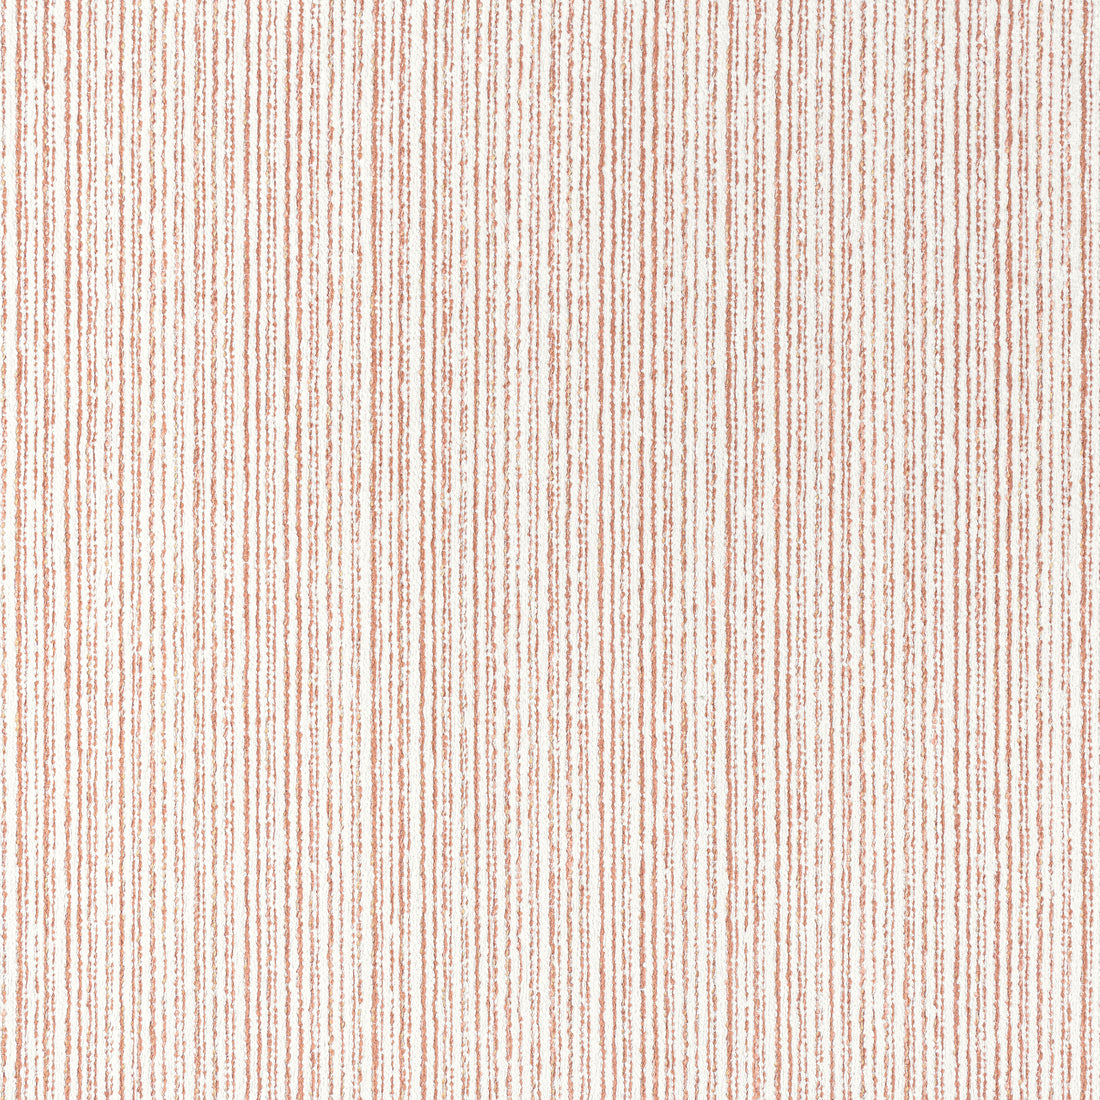 Zia Stripe fabric in clay color - pattern number W8804 - by Thibaut in the Haven collection